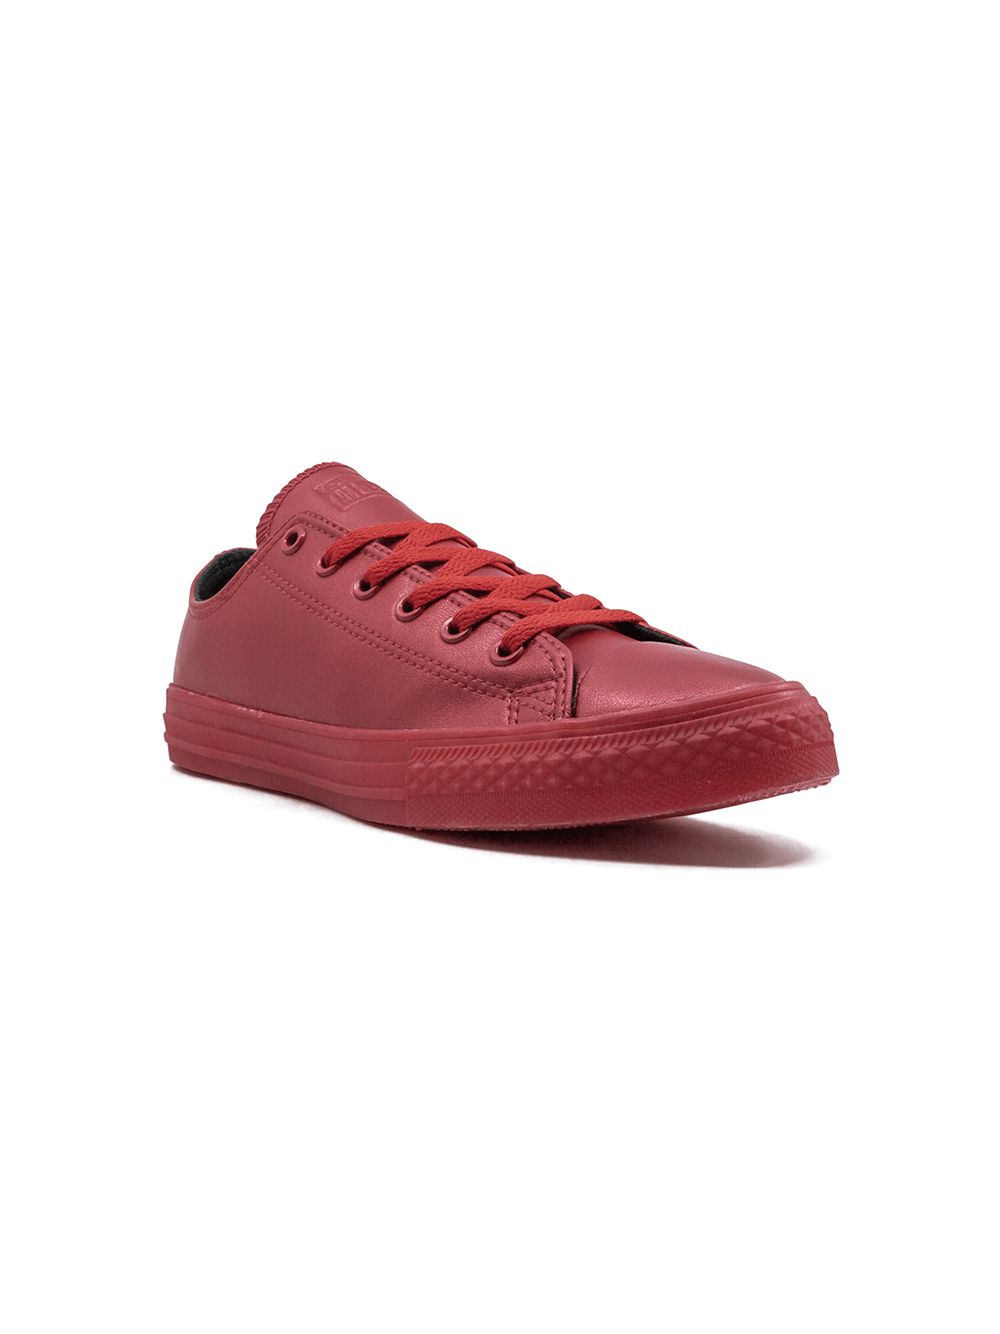 Converse Kids' Chuck Taylor All Star Ox Sneakers In Red